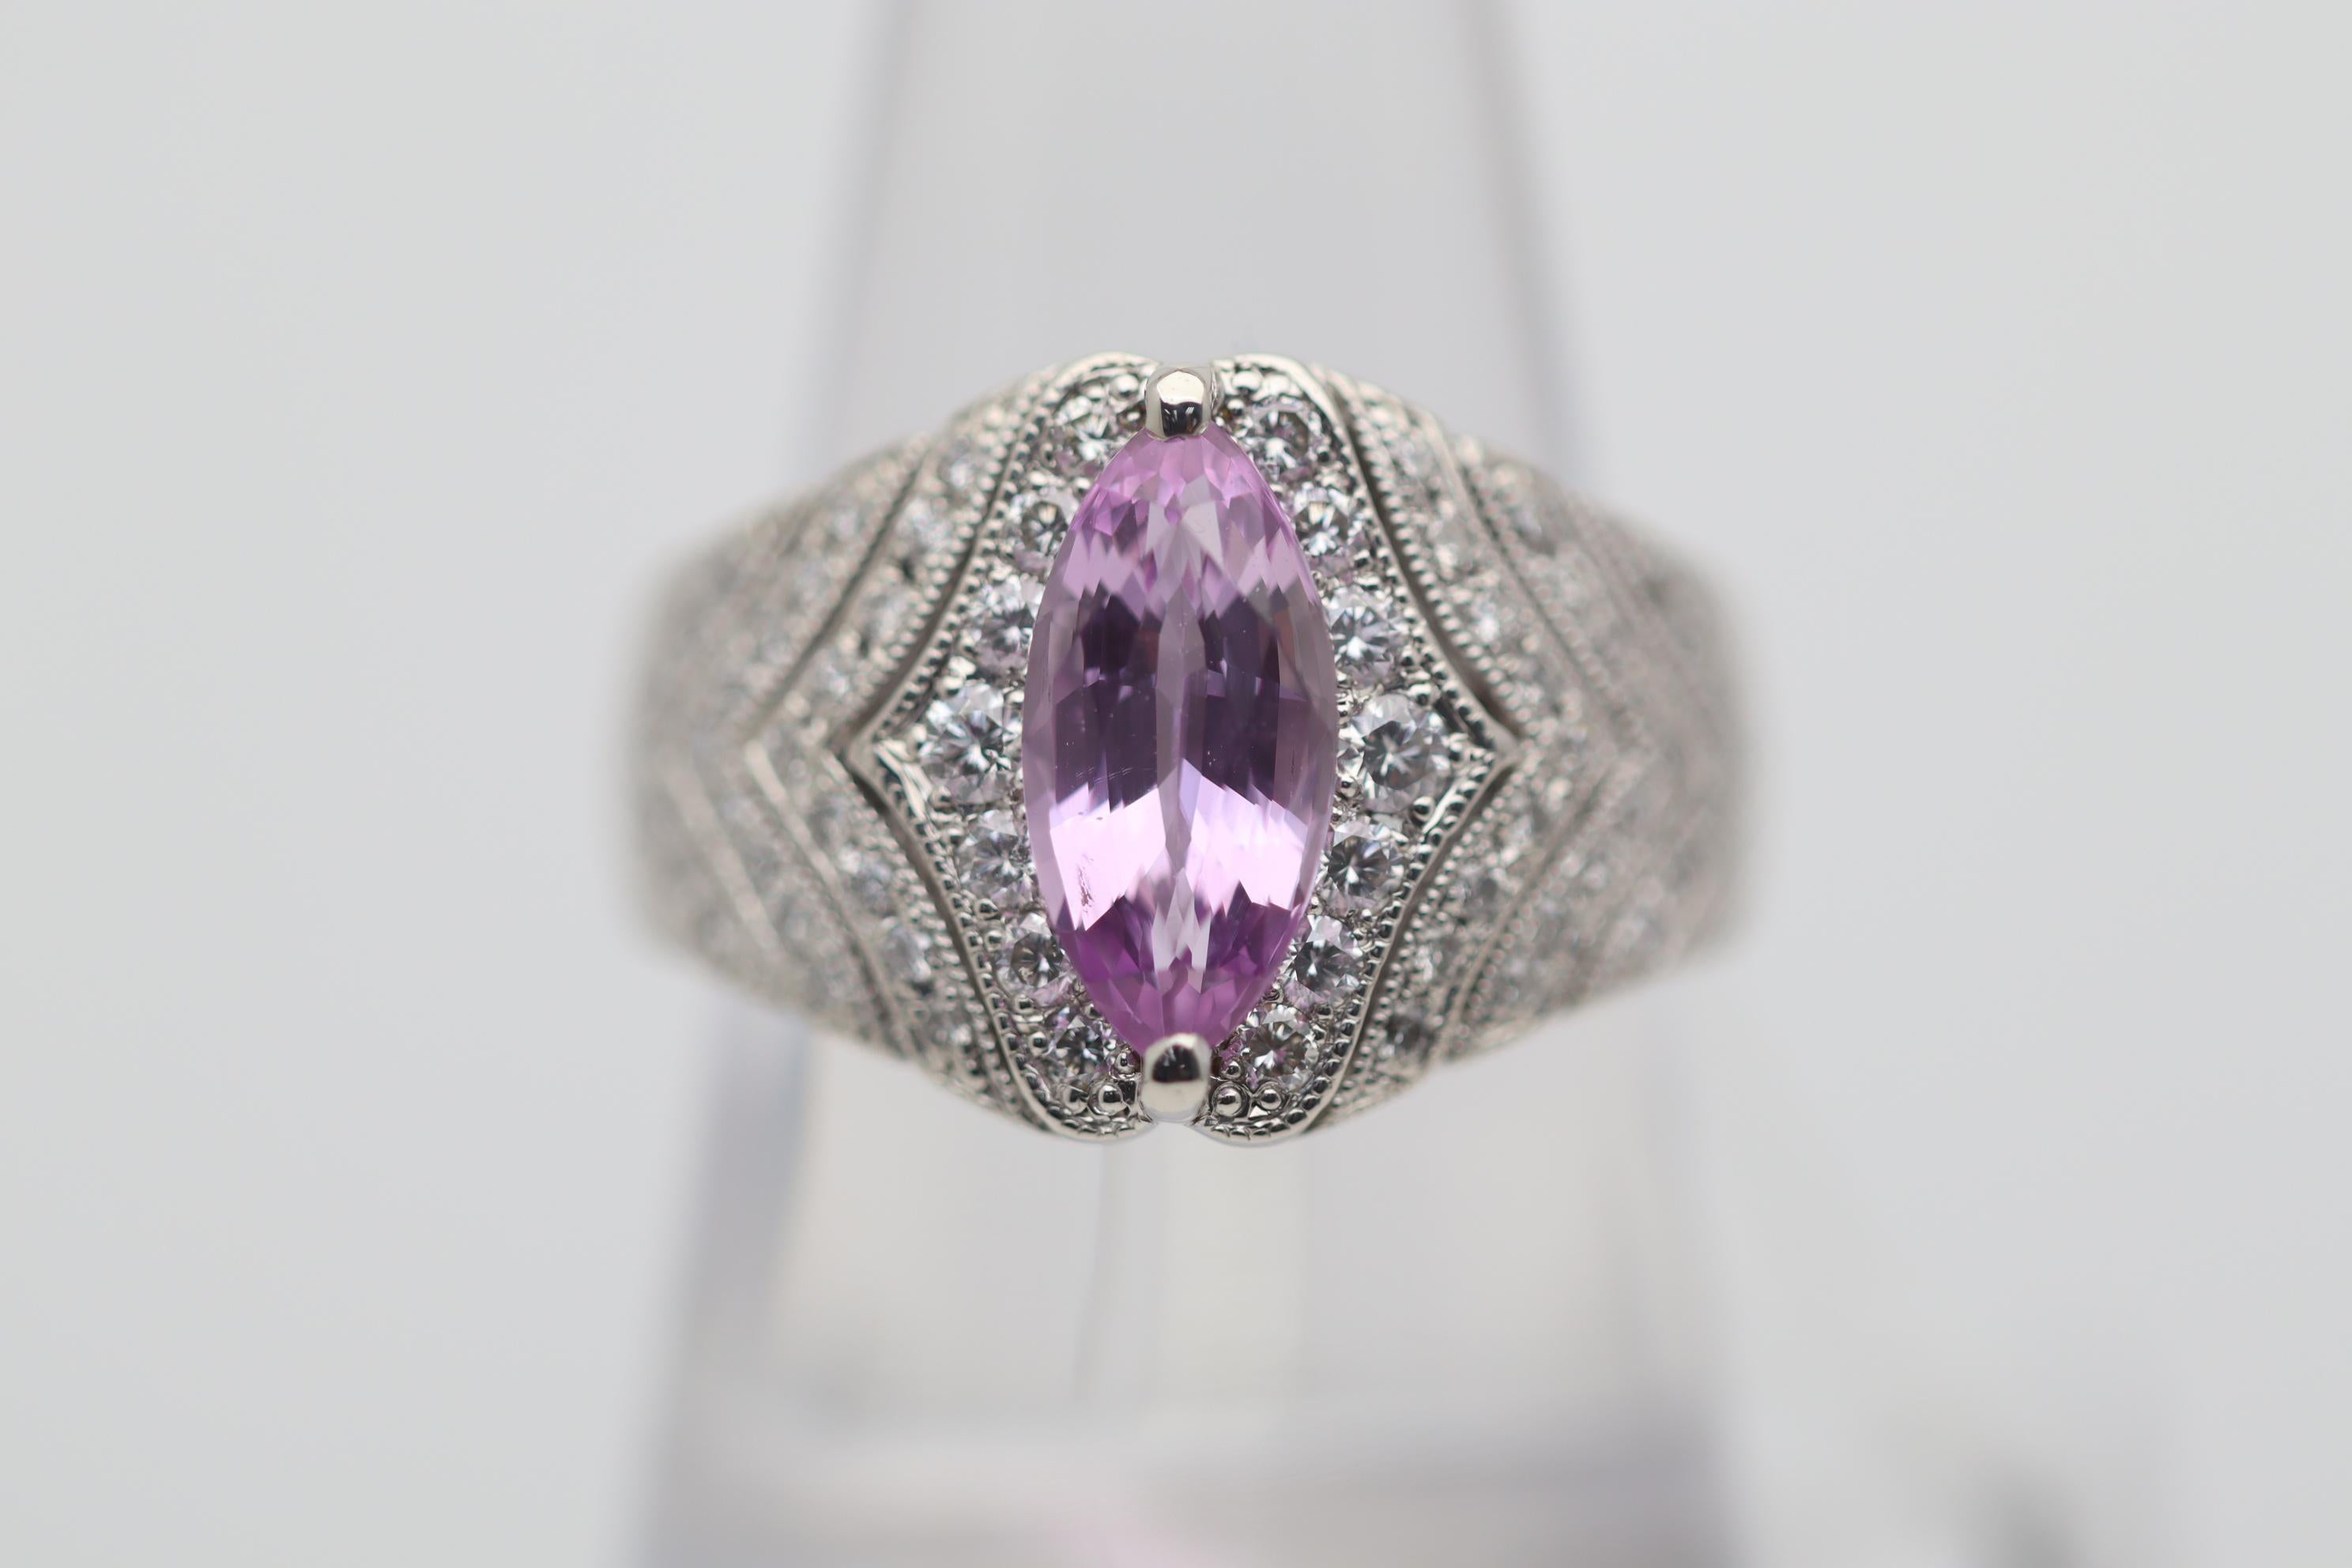 A lovely 2.40 carat pink sapphire takes center stage of this platinum made ring. It has a sweet pink color along with a beautiful long marquise-shape. It is complemented by 0.70 carats of round brilliant-cut diamonds set on its sides. Adding to